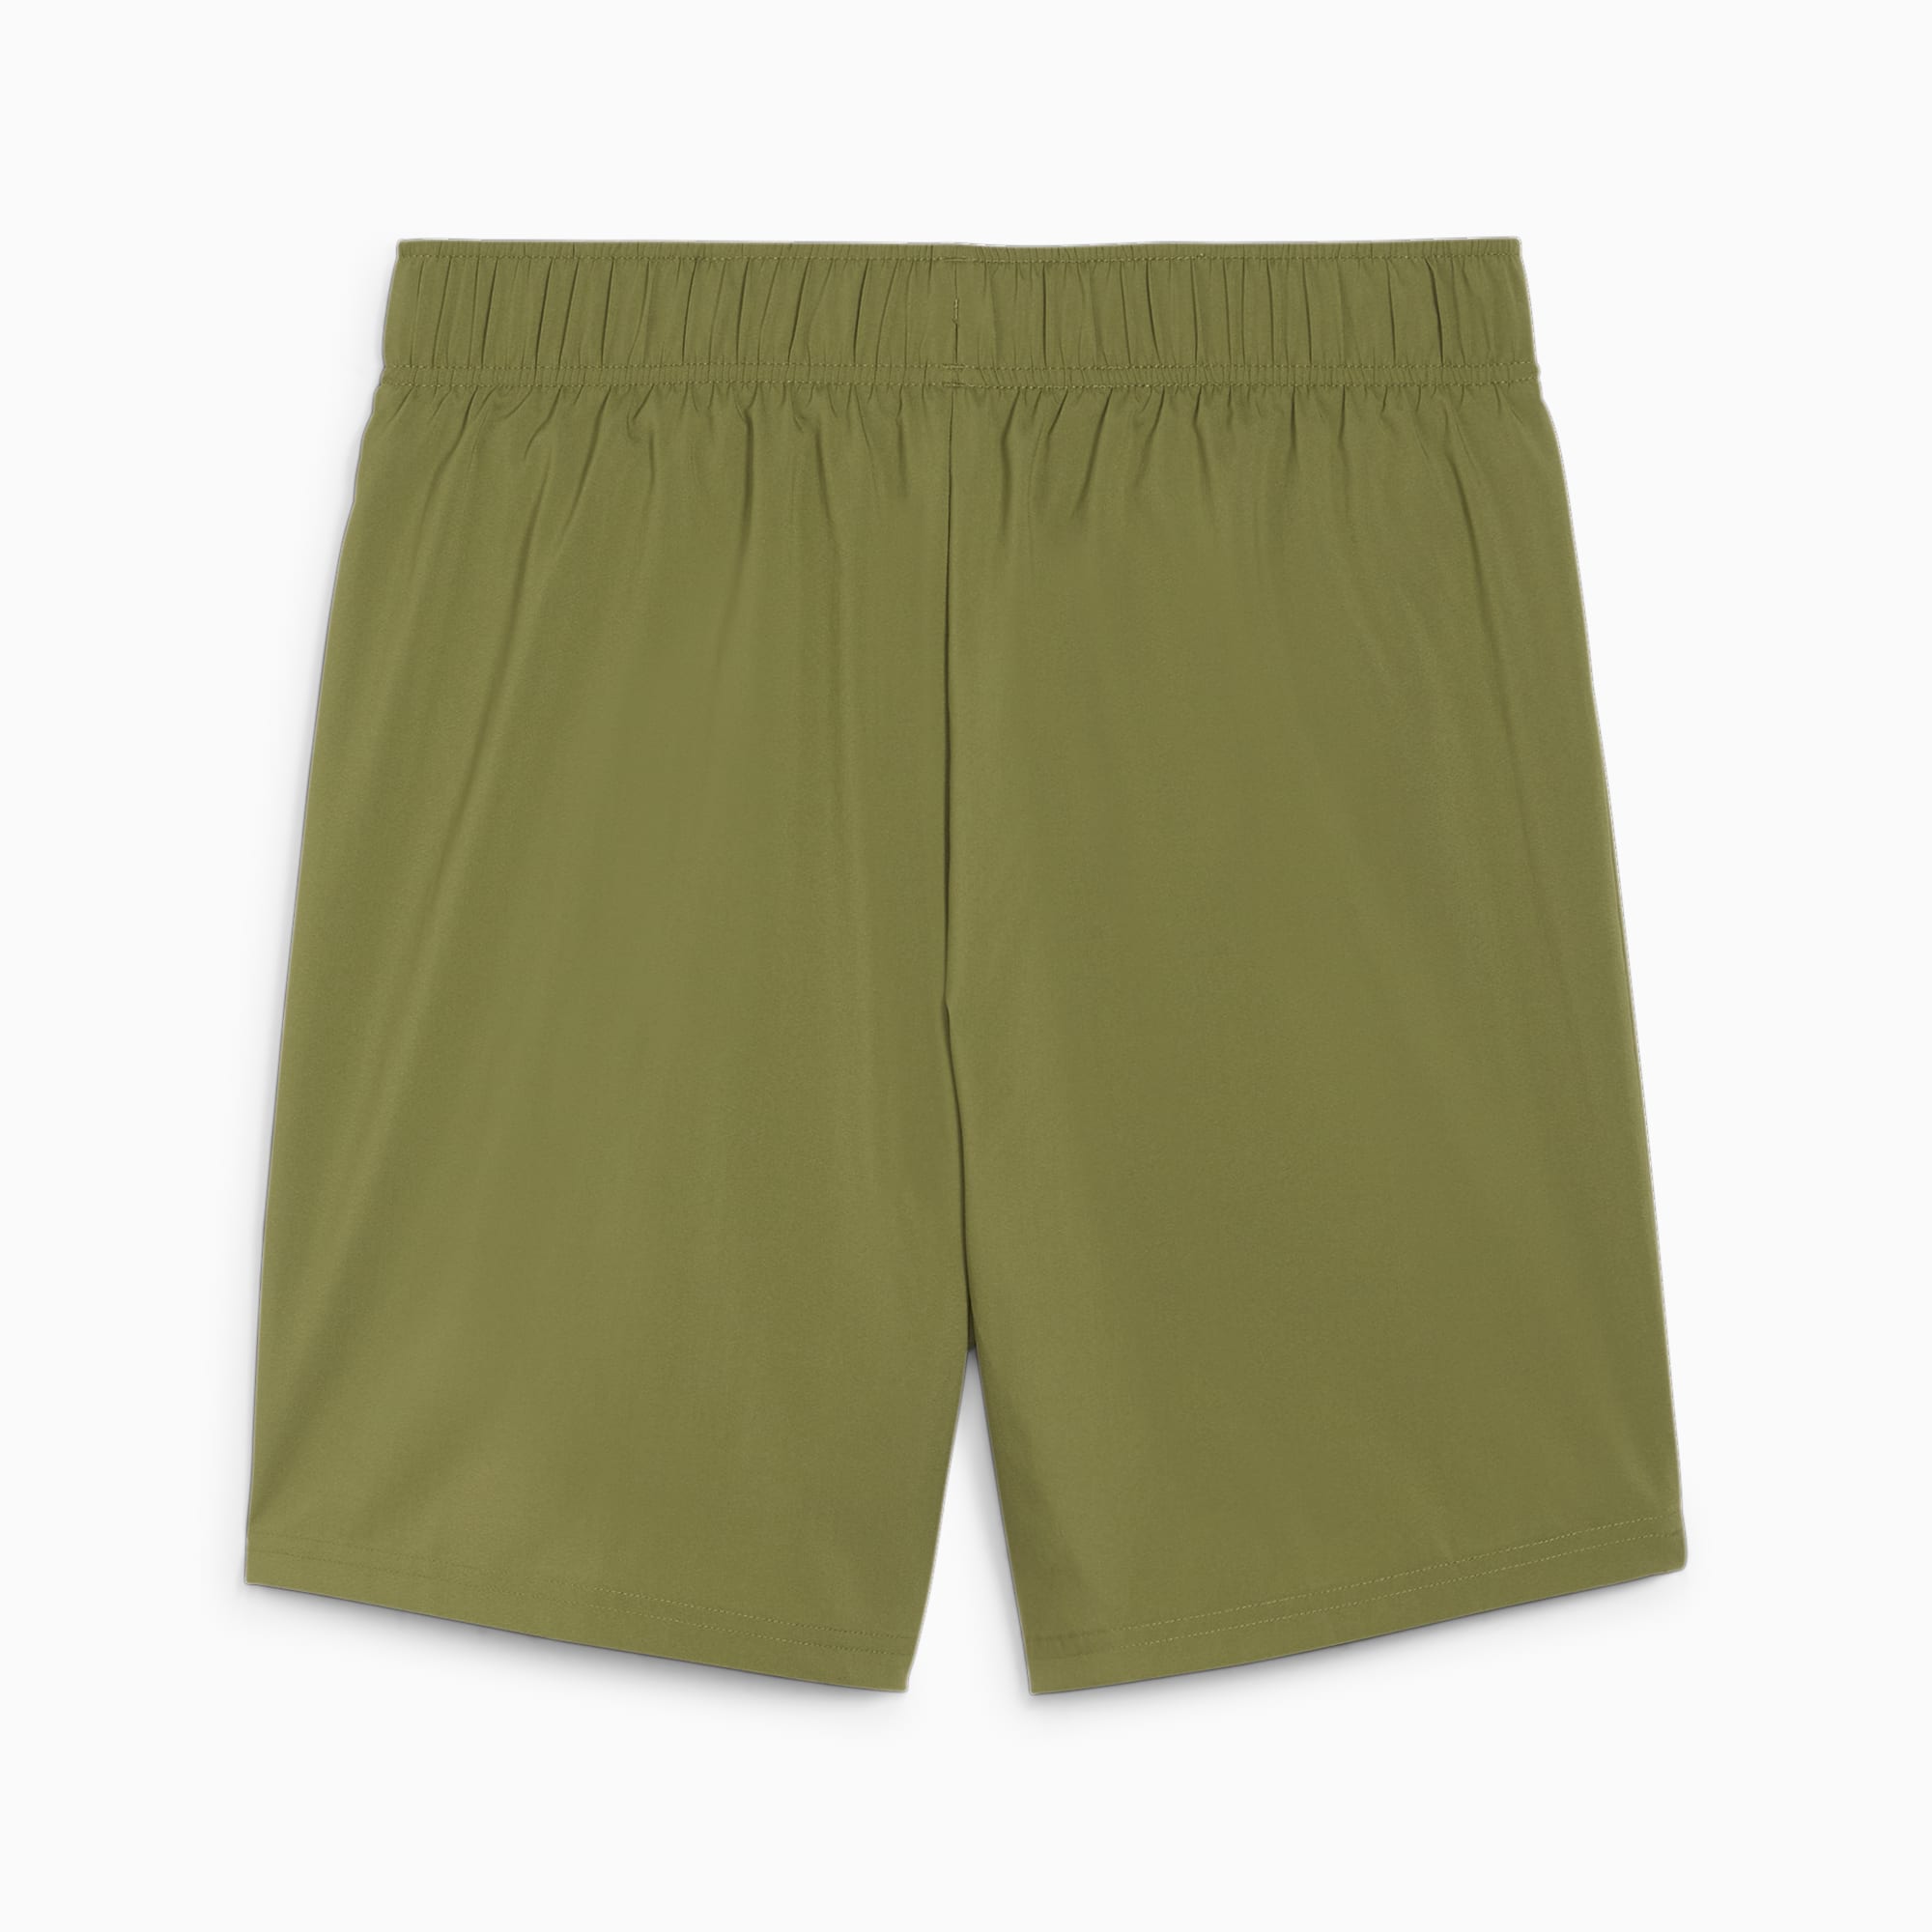 PUMA Favourite 2-in-1 Men's Running Shorts, Olive Green, Size XL, Clothing